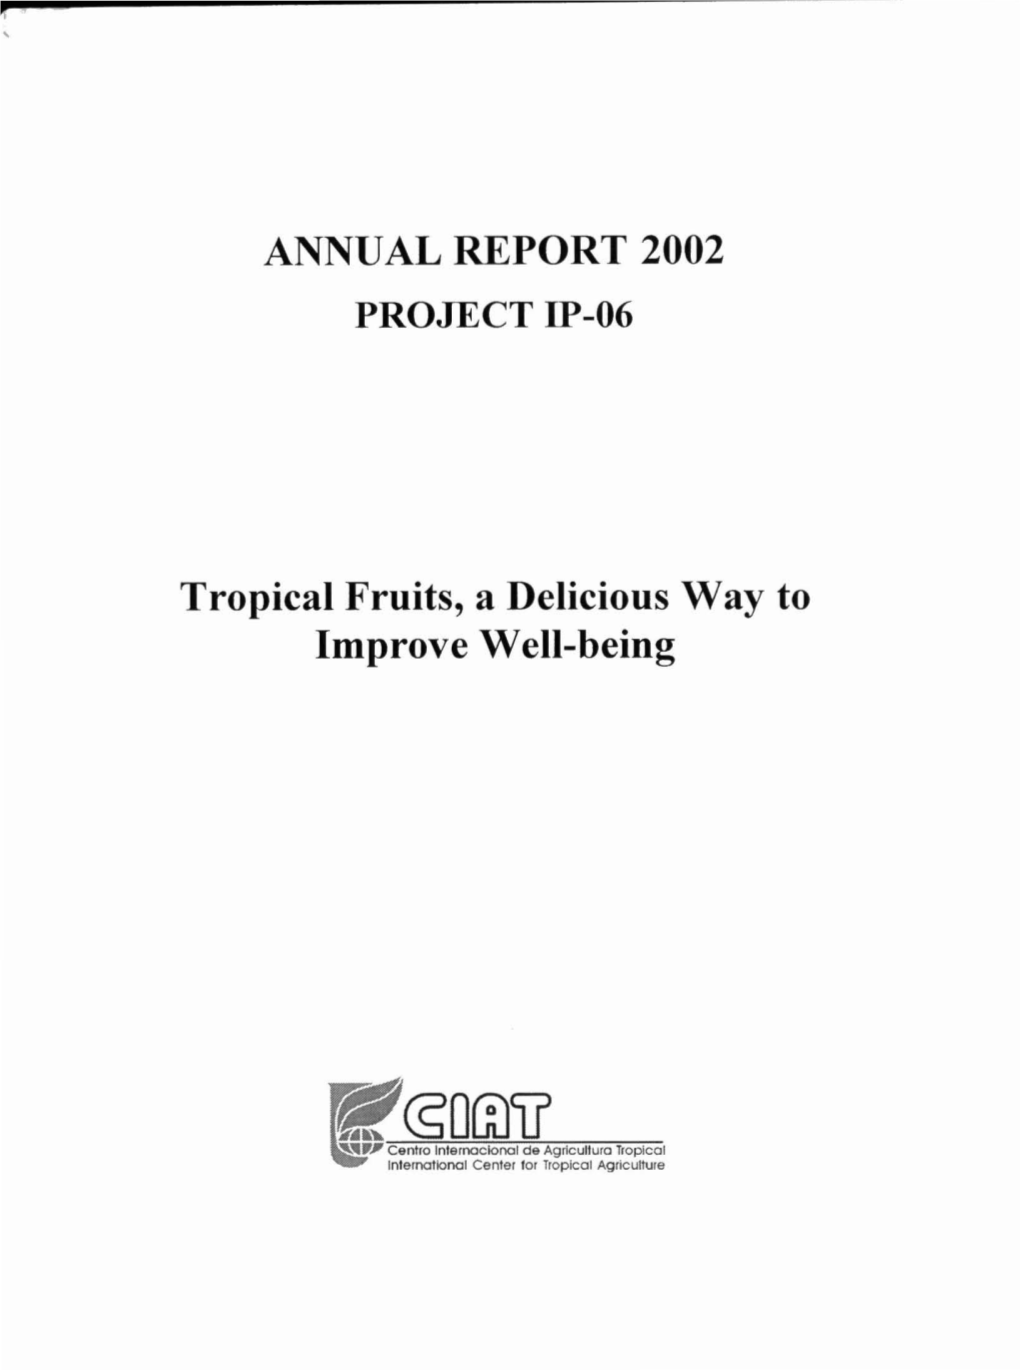 ANNUAL REPORT 2002 Tropical Fruits, a Delicious Way to Improve